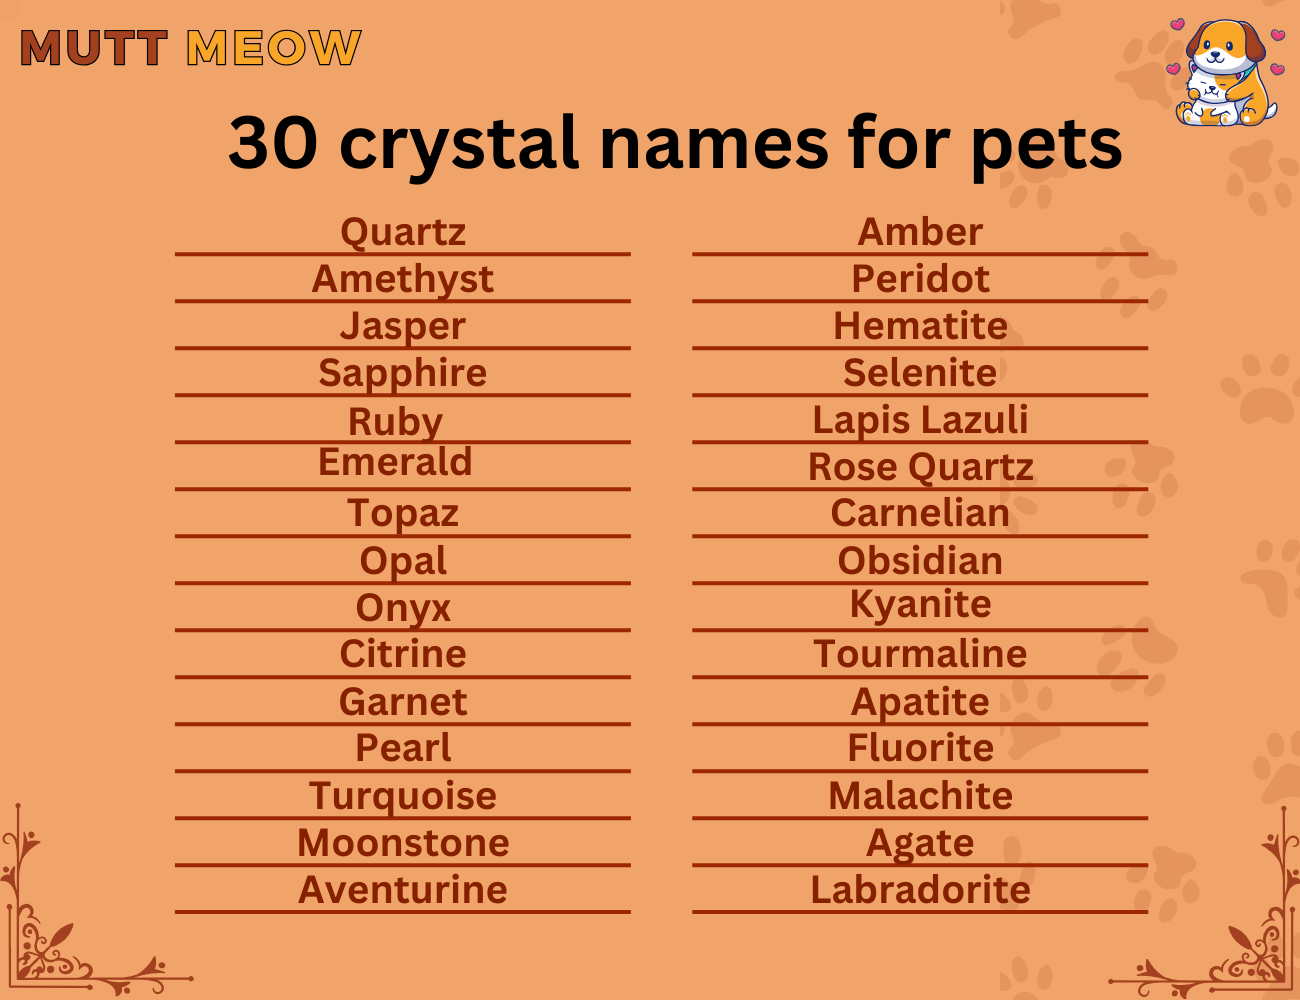 30 crystal names for pets